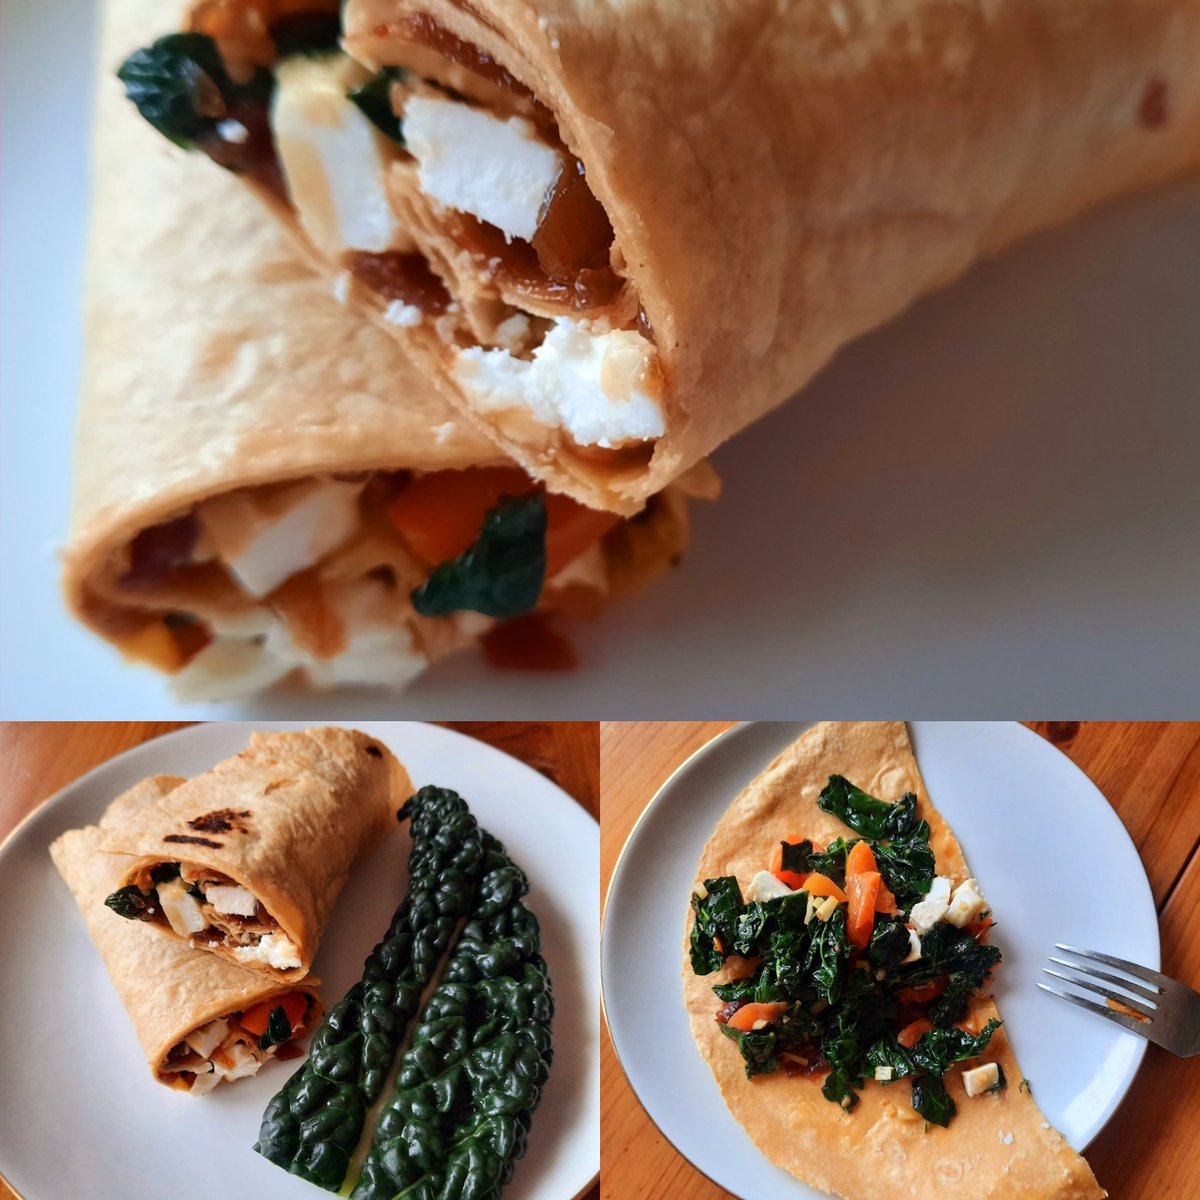 My healthy swap for cancer prevention @WCRF_UK #SarnieSwap: super quick cavolo nero (kale) fried with cherry tomatoes on olive oil, added feta cheese, and onion chutney in sweet potato wrap 😋 #CPAW23 #BowelCancer